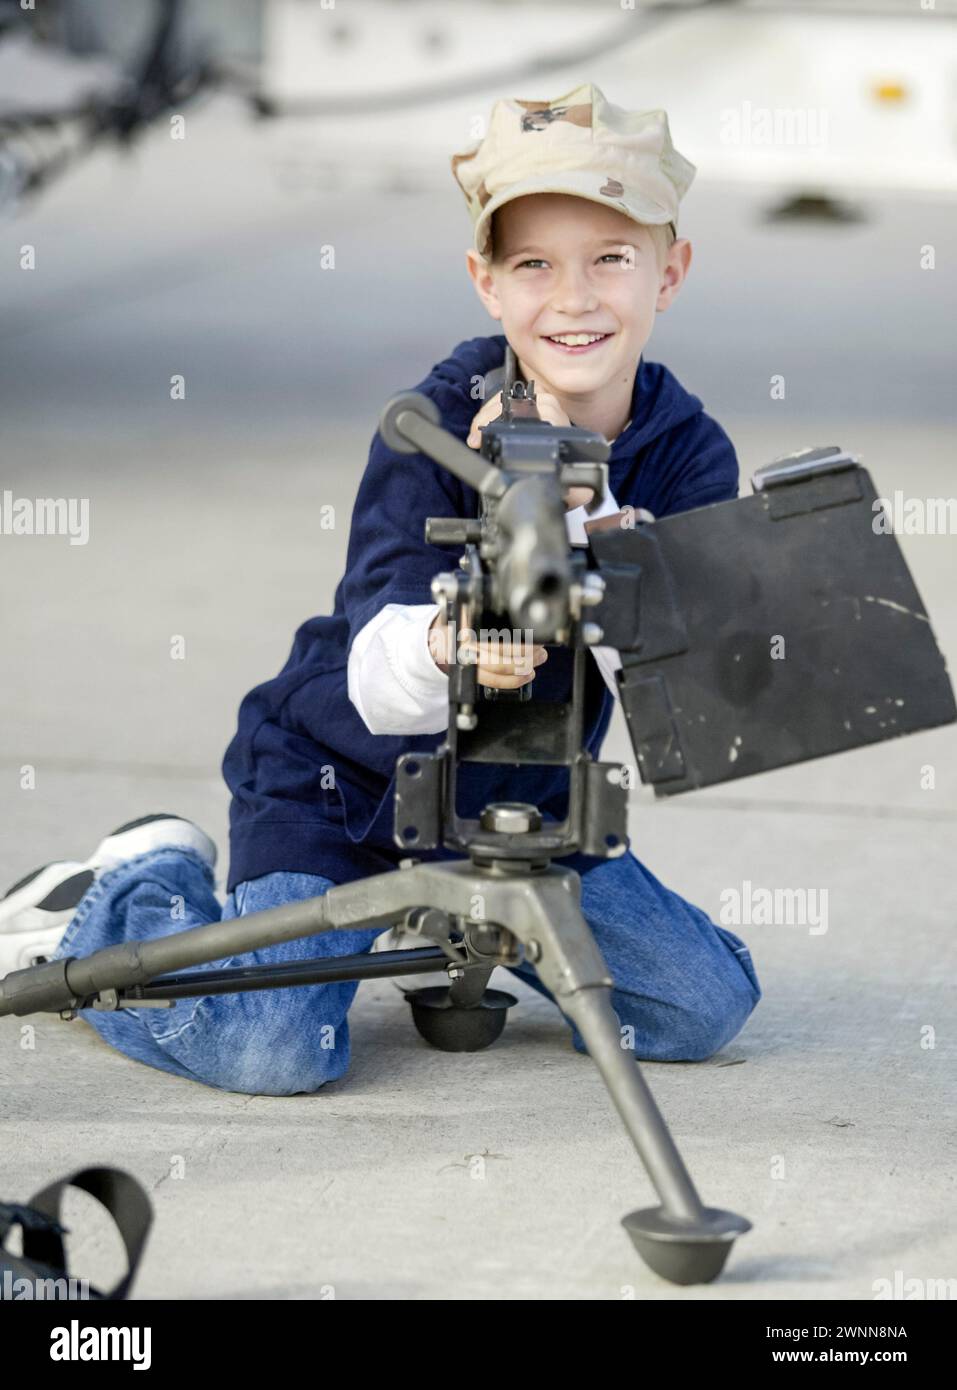 A young boy checks out the machine guns on display at the Miramar Air Show in San Diego, CA. Stock Photo